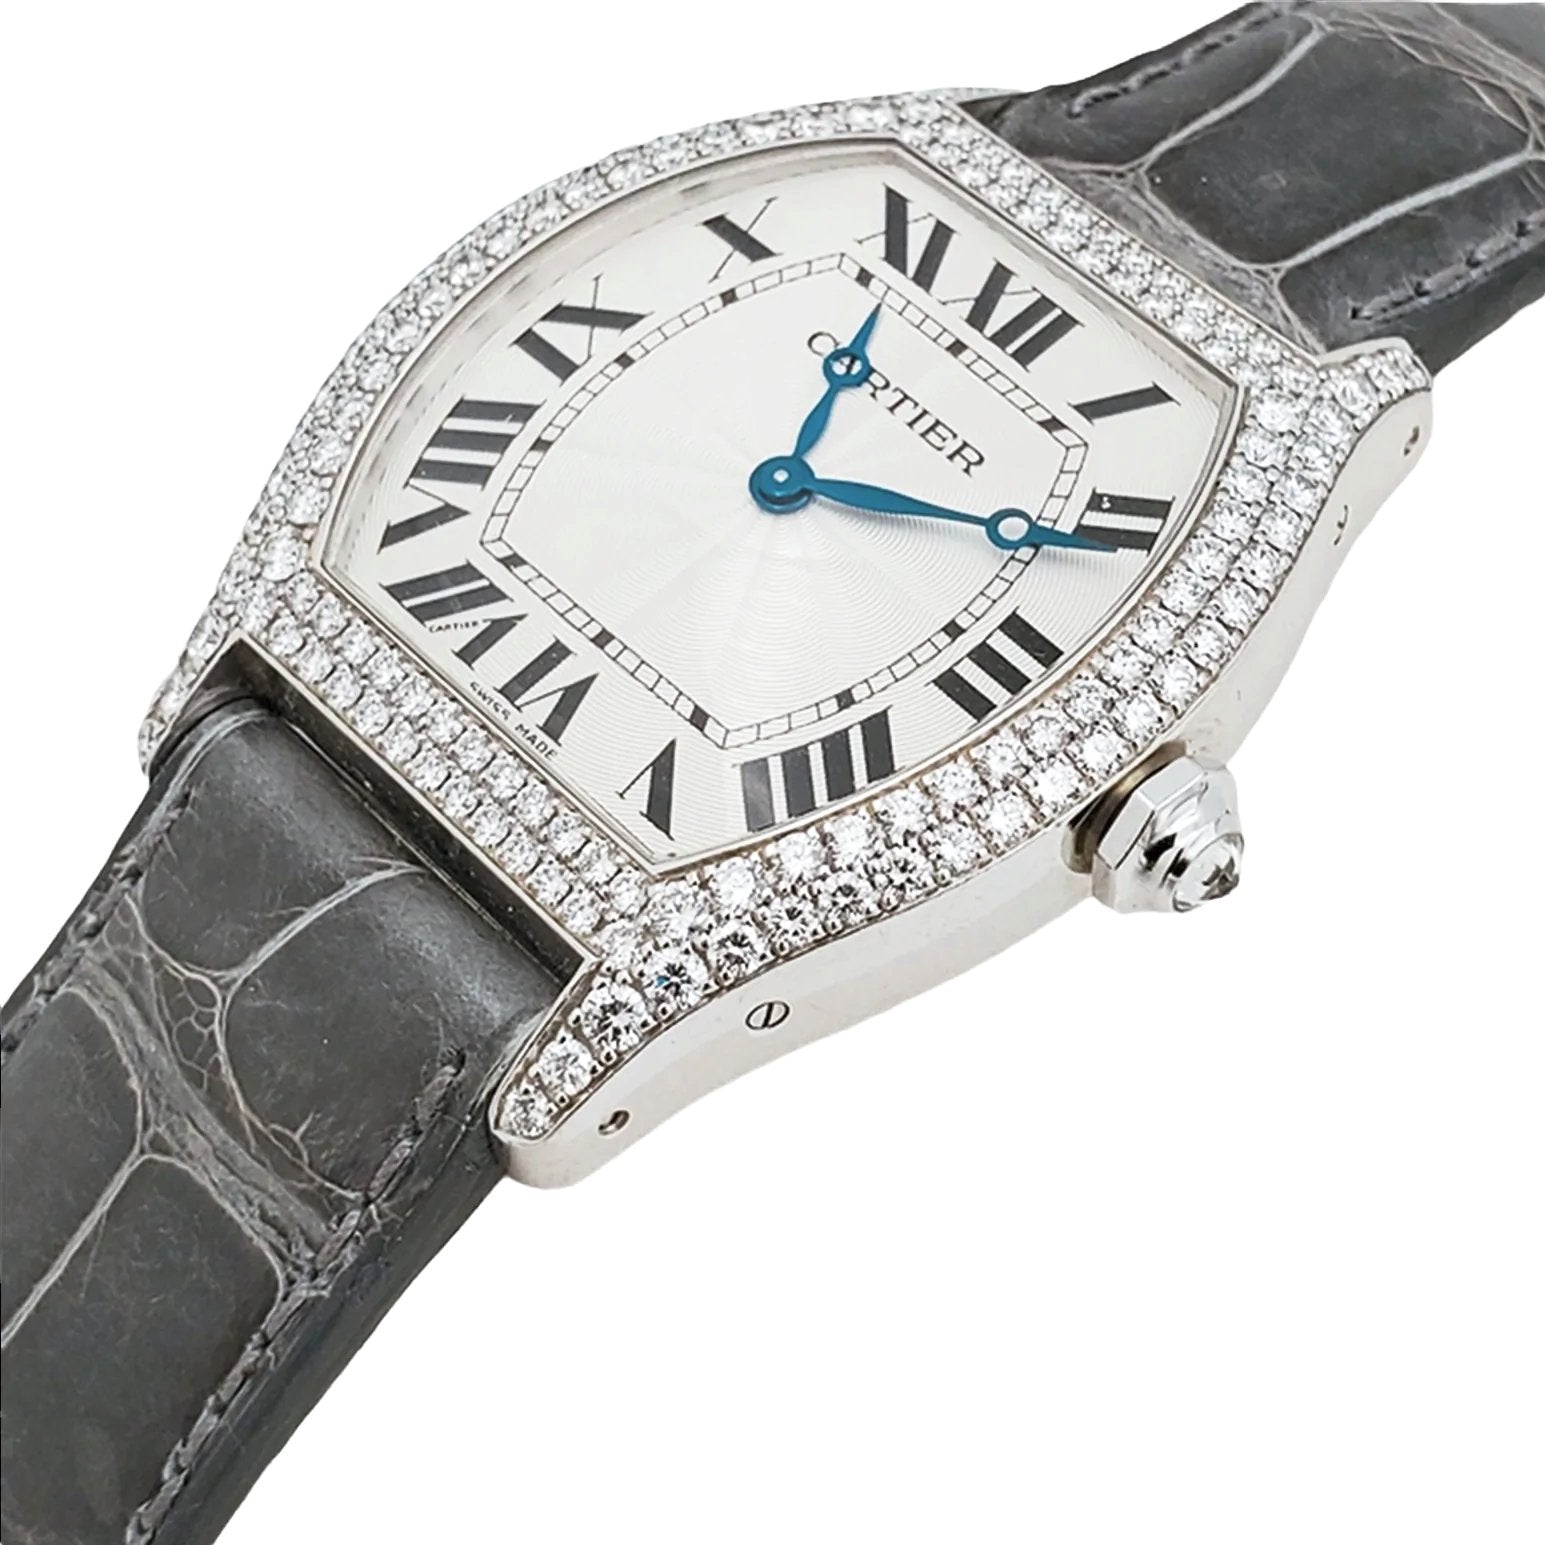 Ladies Cartier Tortue 18K White Gold Watch with Green Leather Band, White Dial and Diamond Bezel. (Pre-Owned)